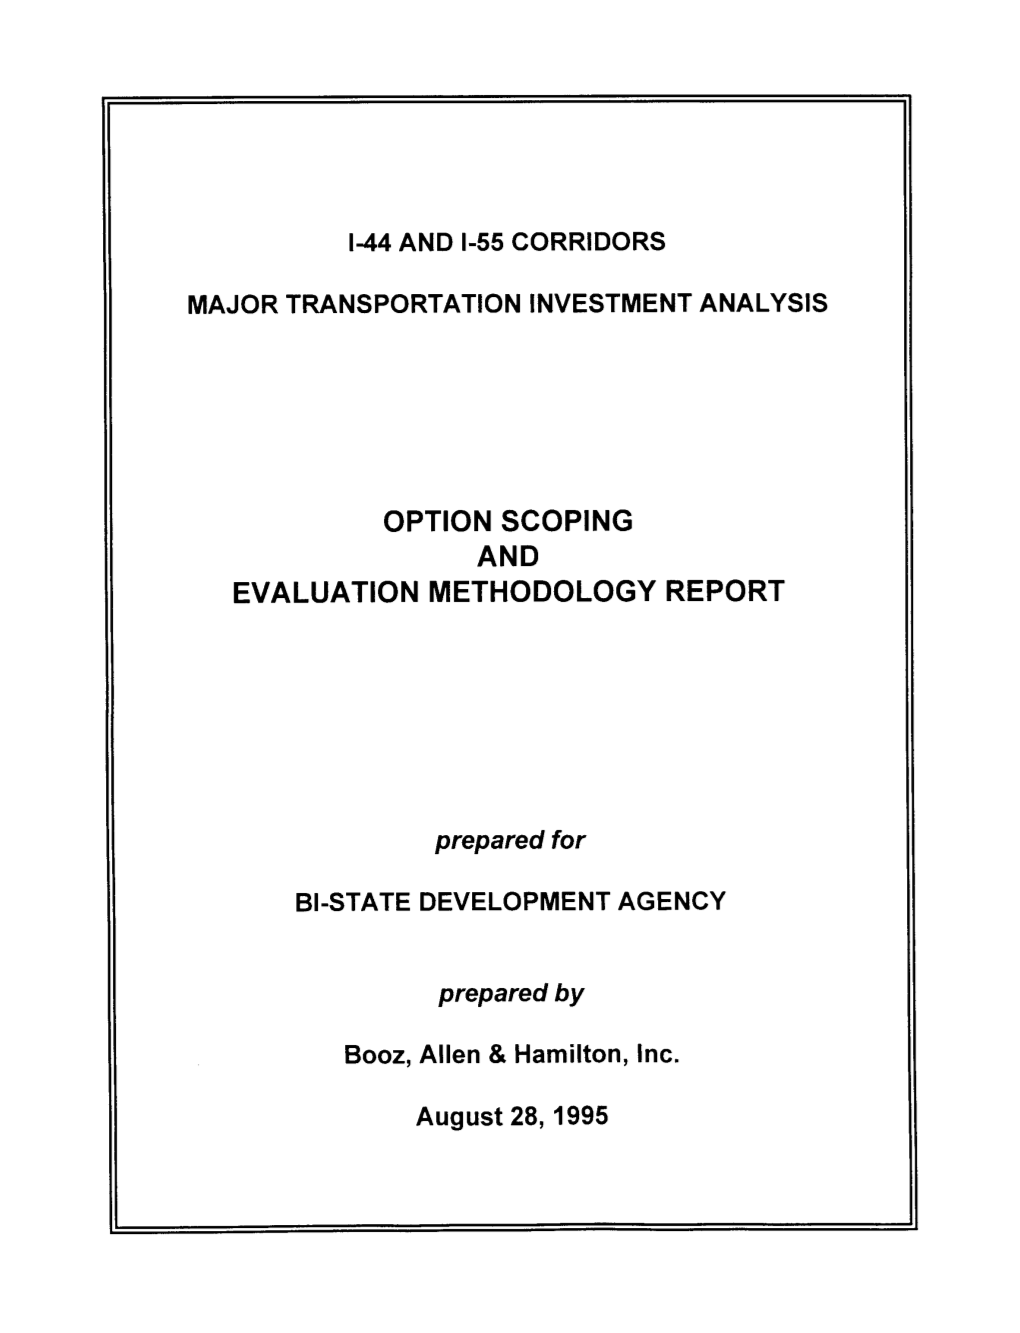 Option Scoping and Evaluation Methodology Report